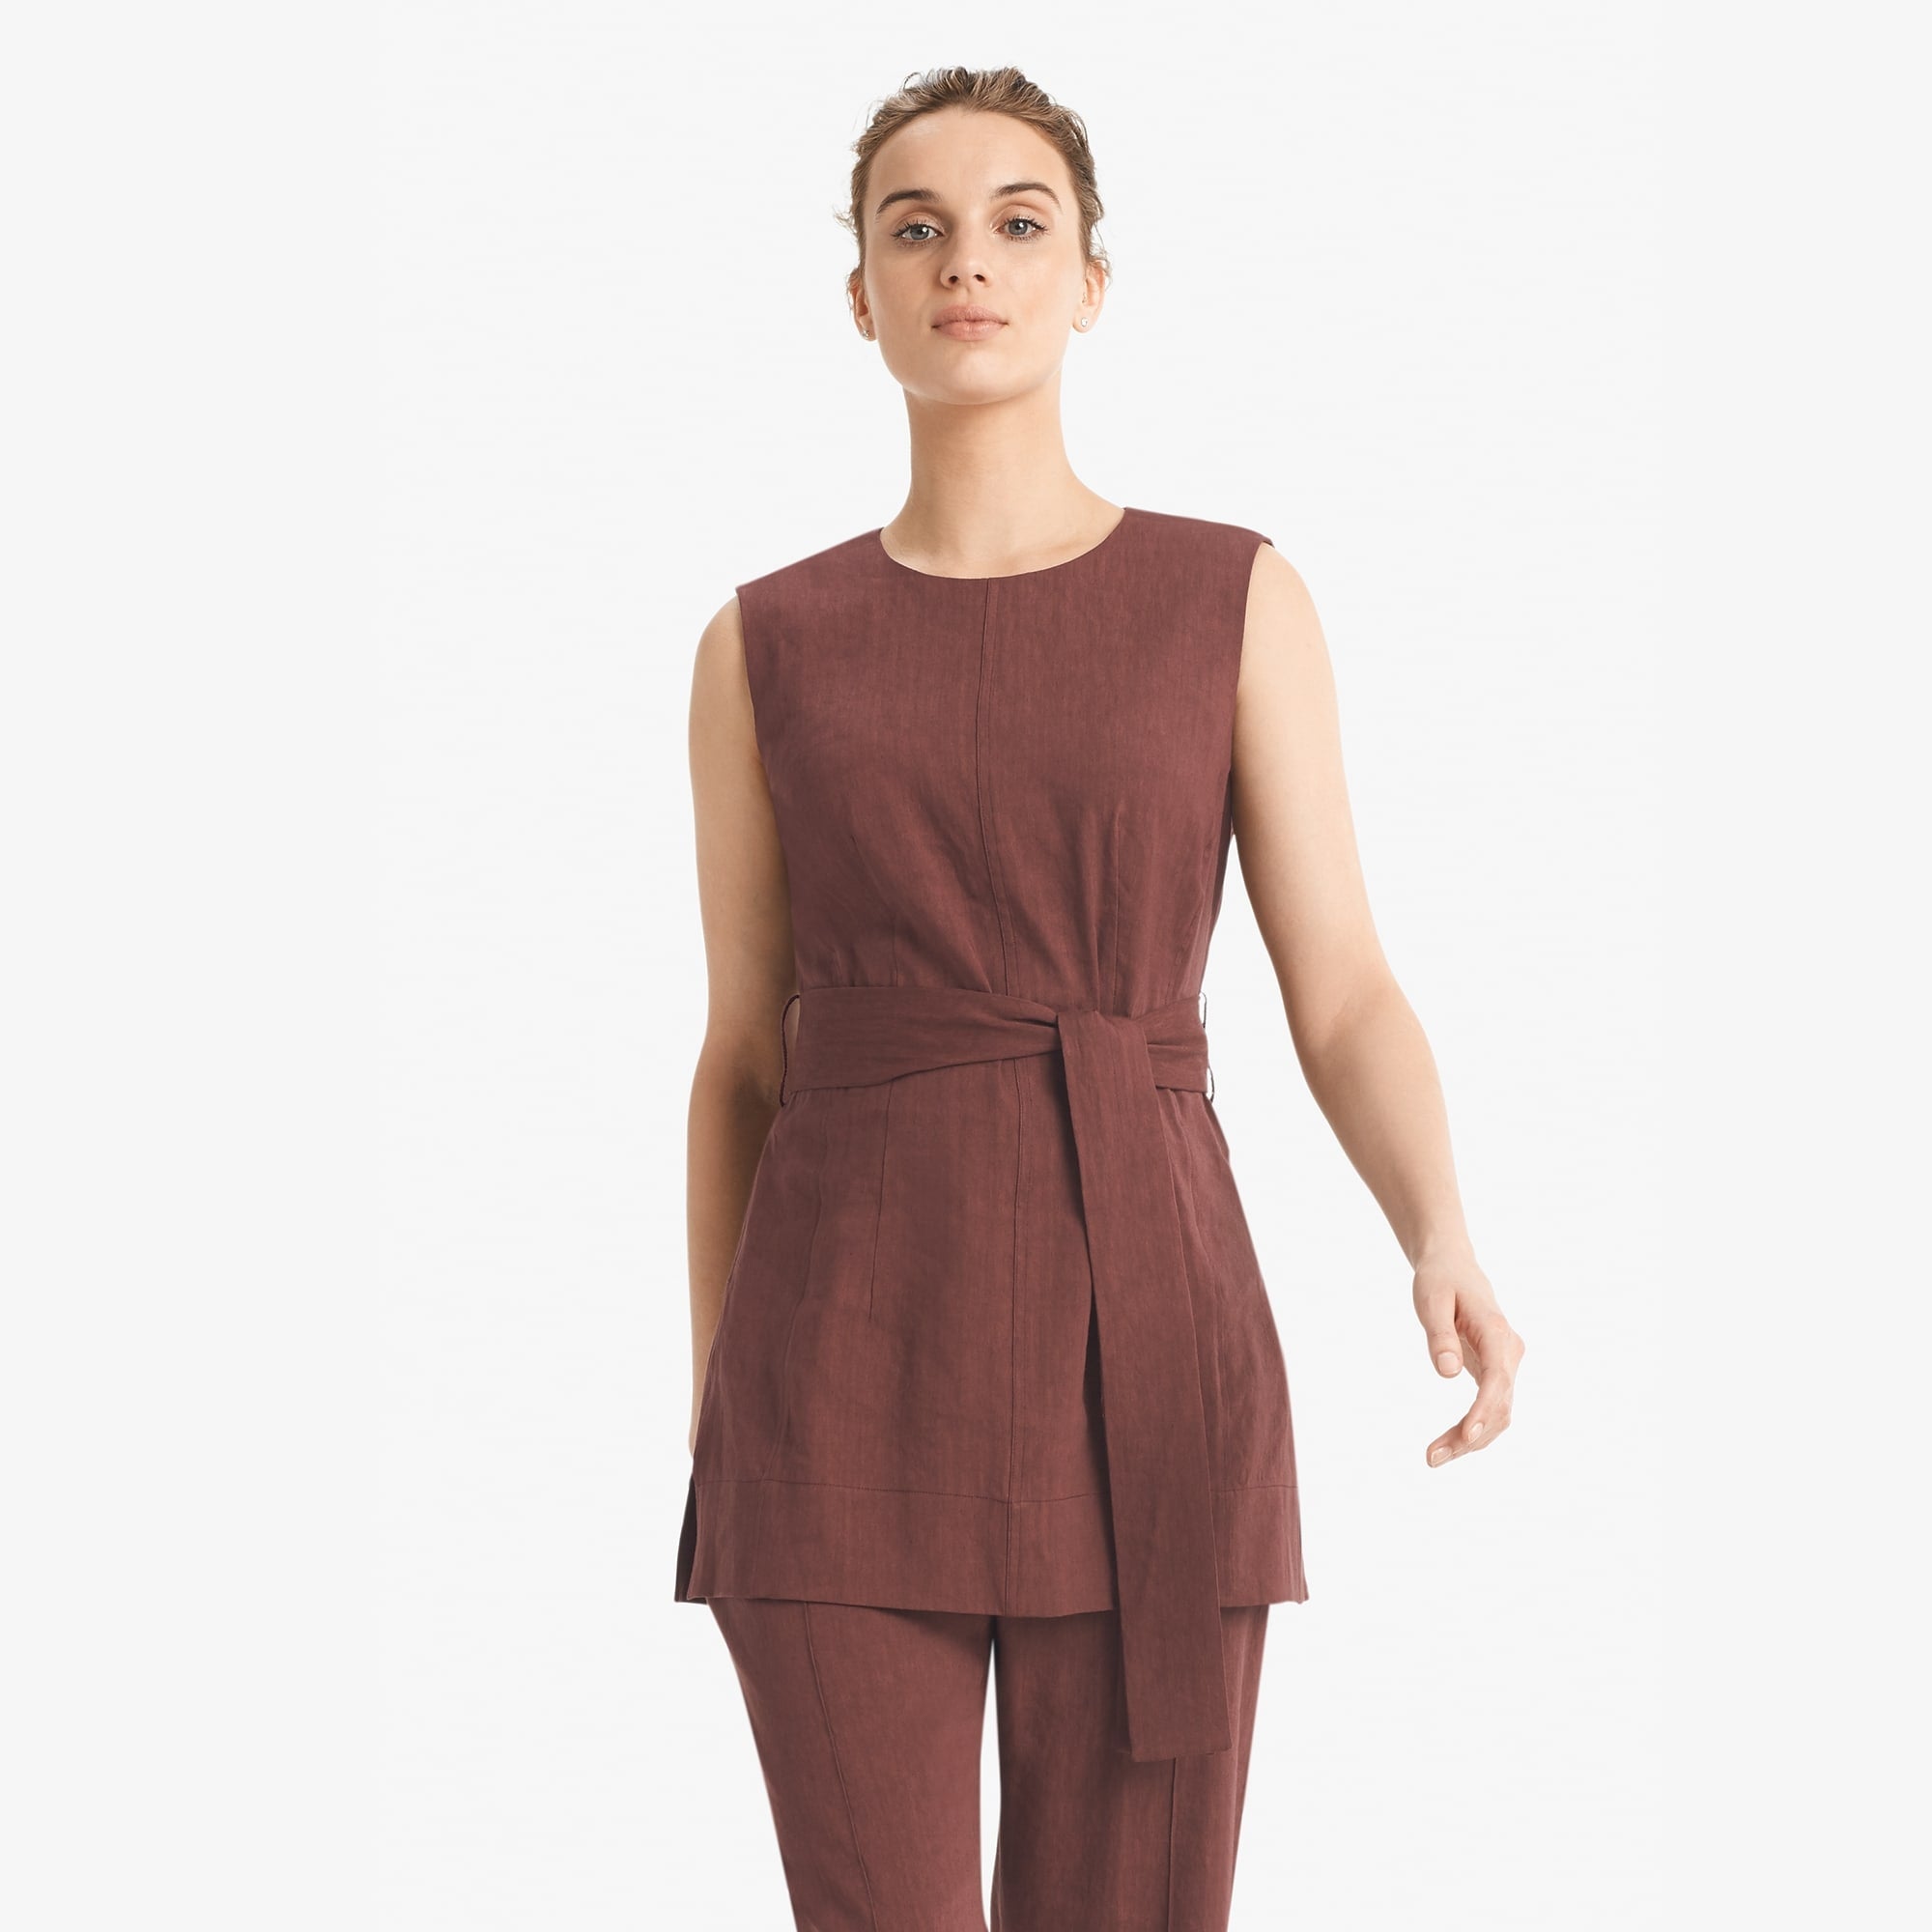 Front image of a woman standing wearing the Angelina top stretch linen in sumac